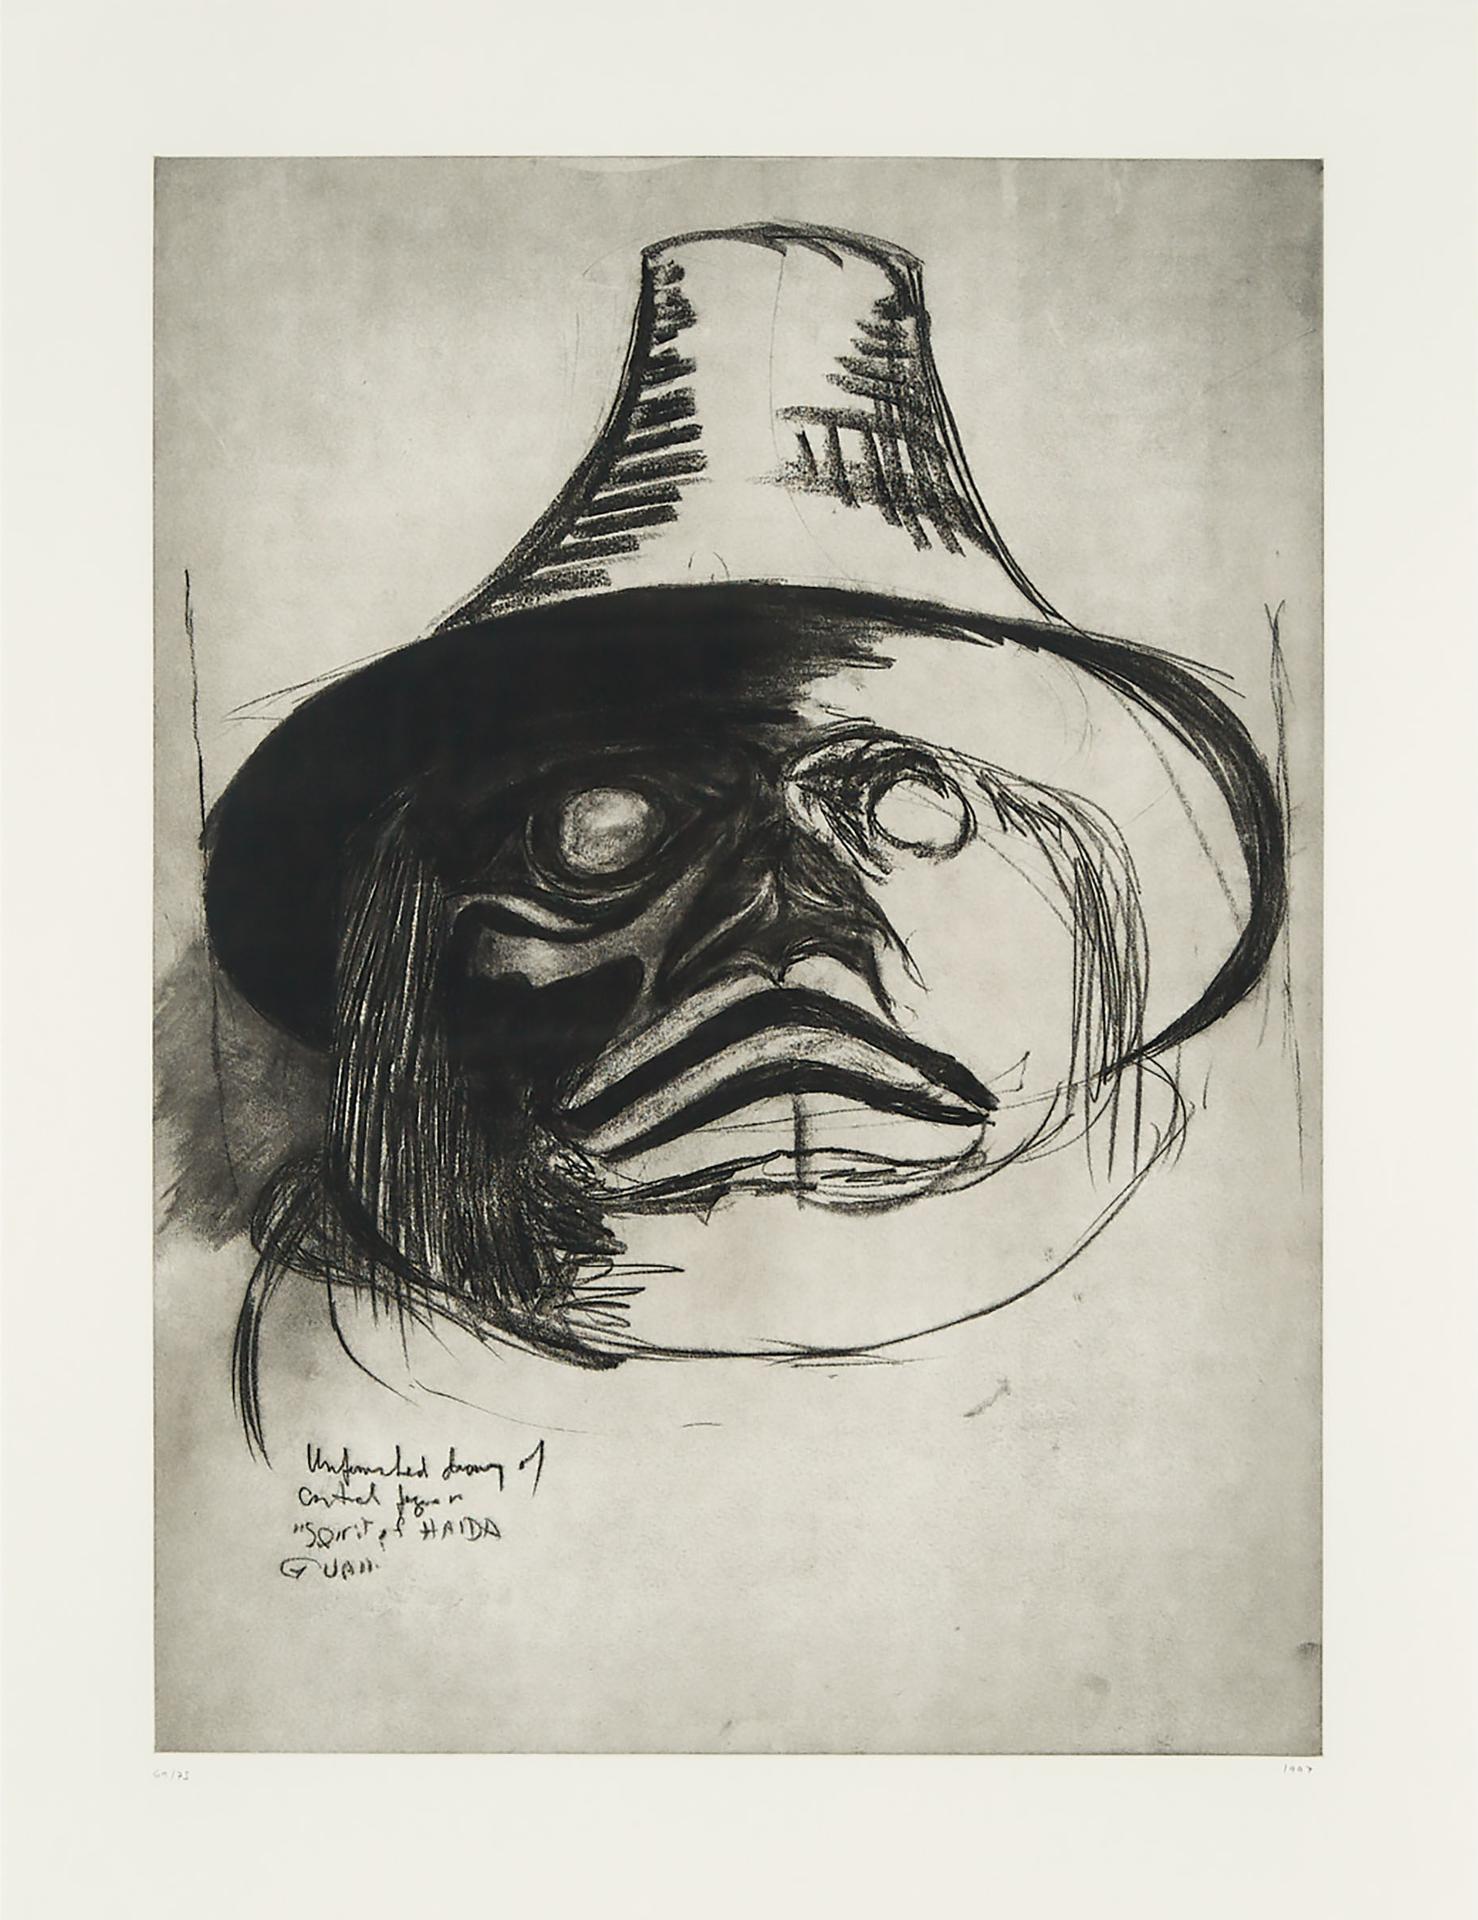 Bill (William) Ronald Reid (1920-1998) - Unfinished Drawing Of Central Figure In “Spirit Of Haida Gwai” (The Black Canoe), Printed In 1997